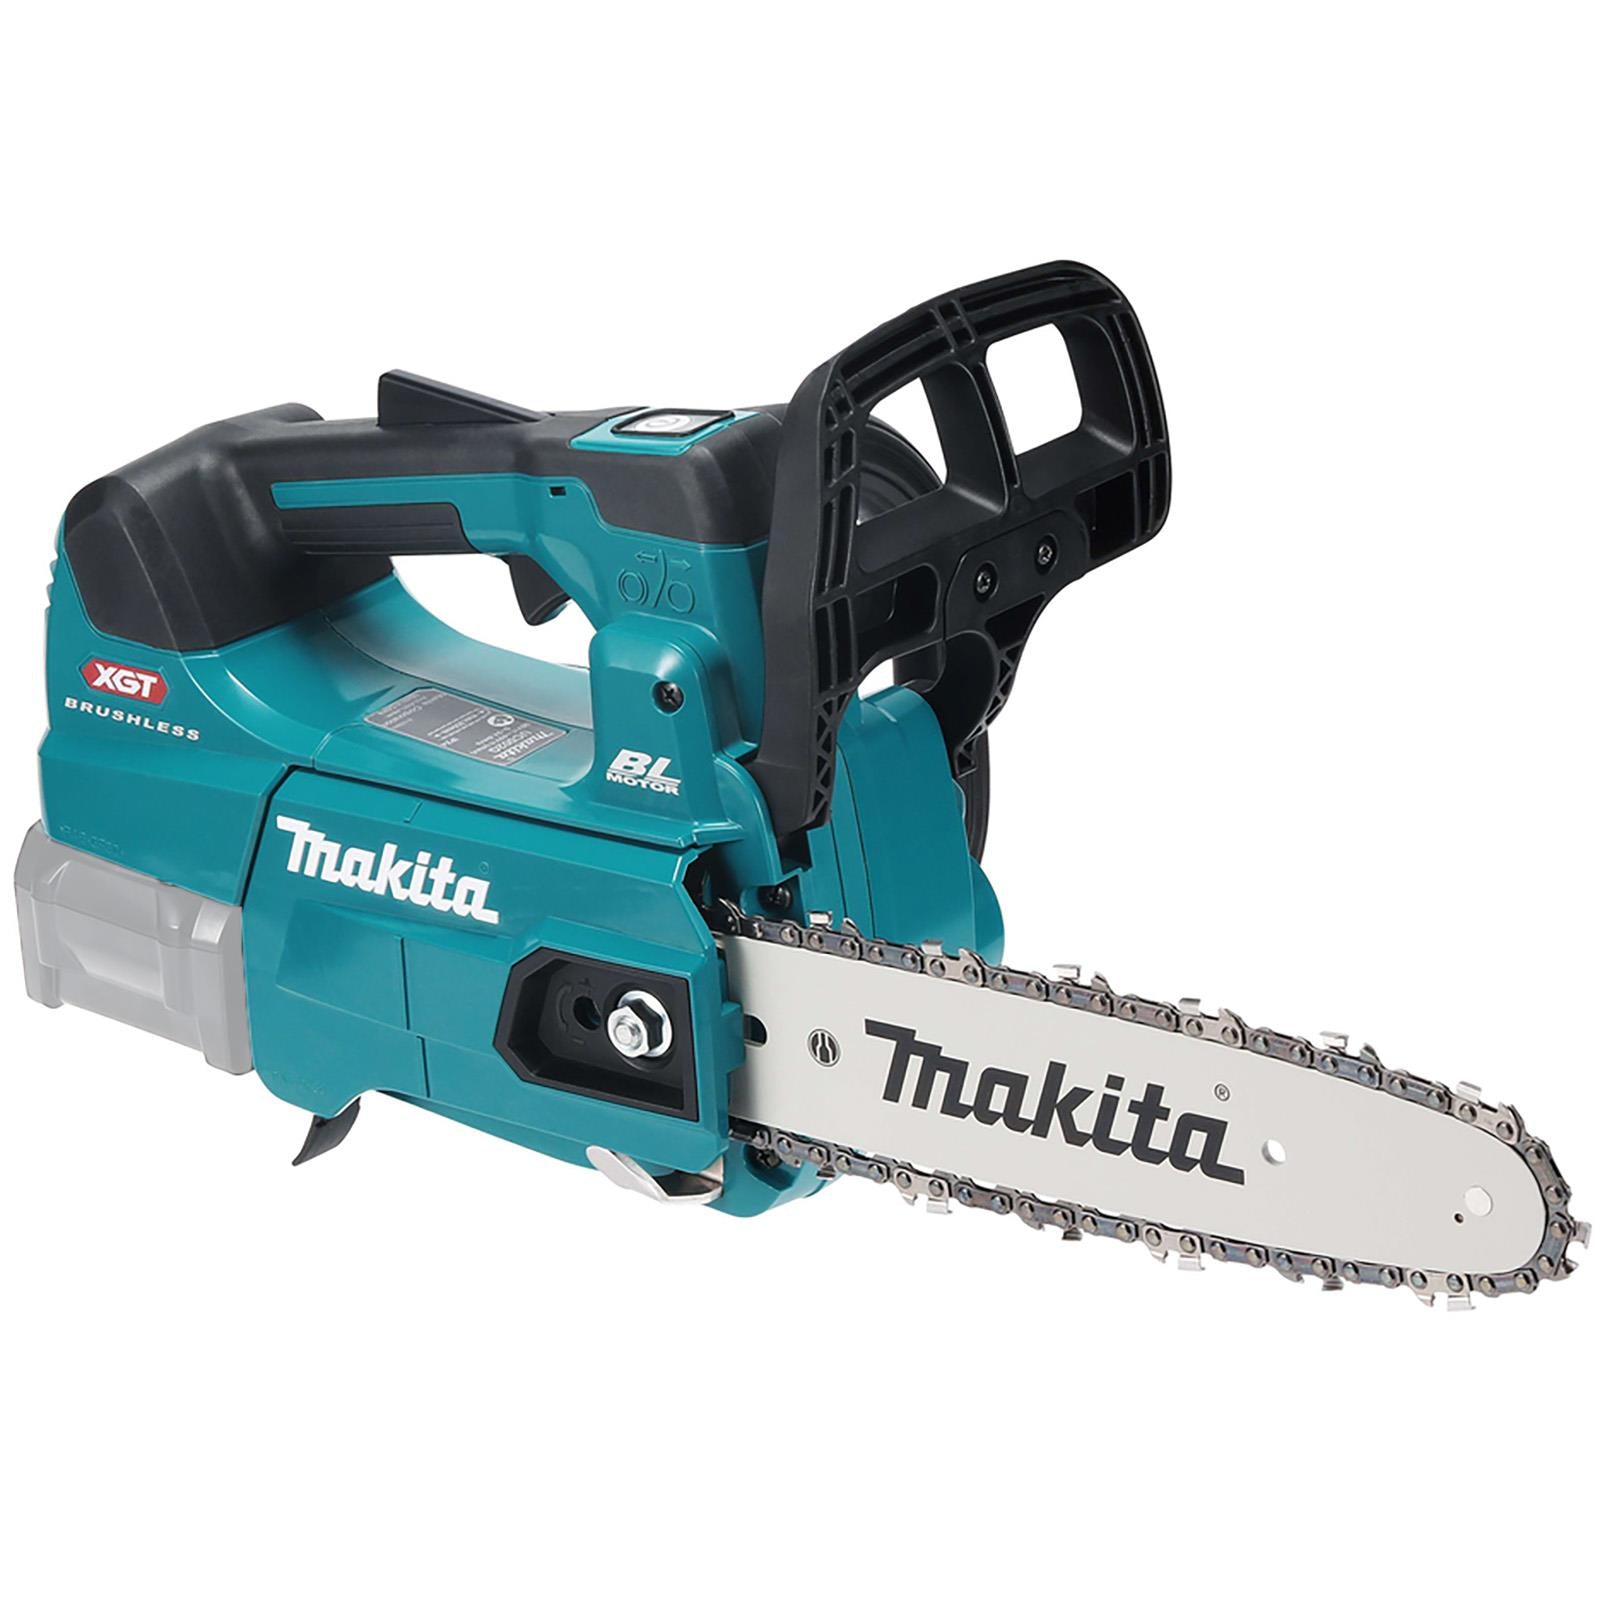 Makita Chainsaw 25cm 10" 40V XGT Brushless Cordless Top Handle Garden Tree Cutting Pruning Bare Unit Body Only UC002GZ